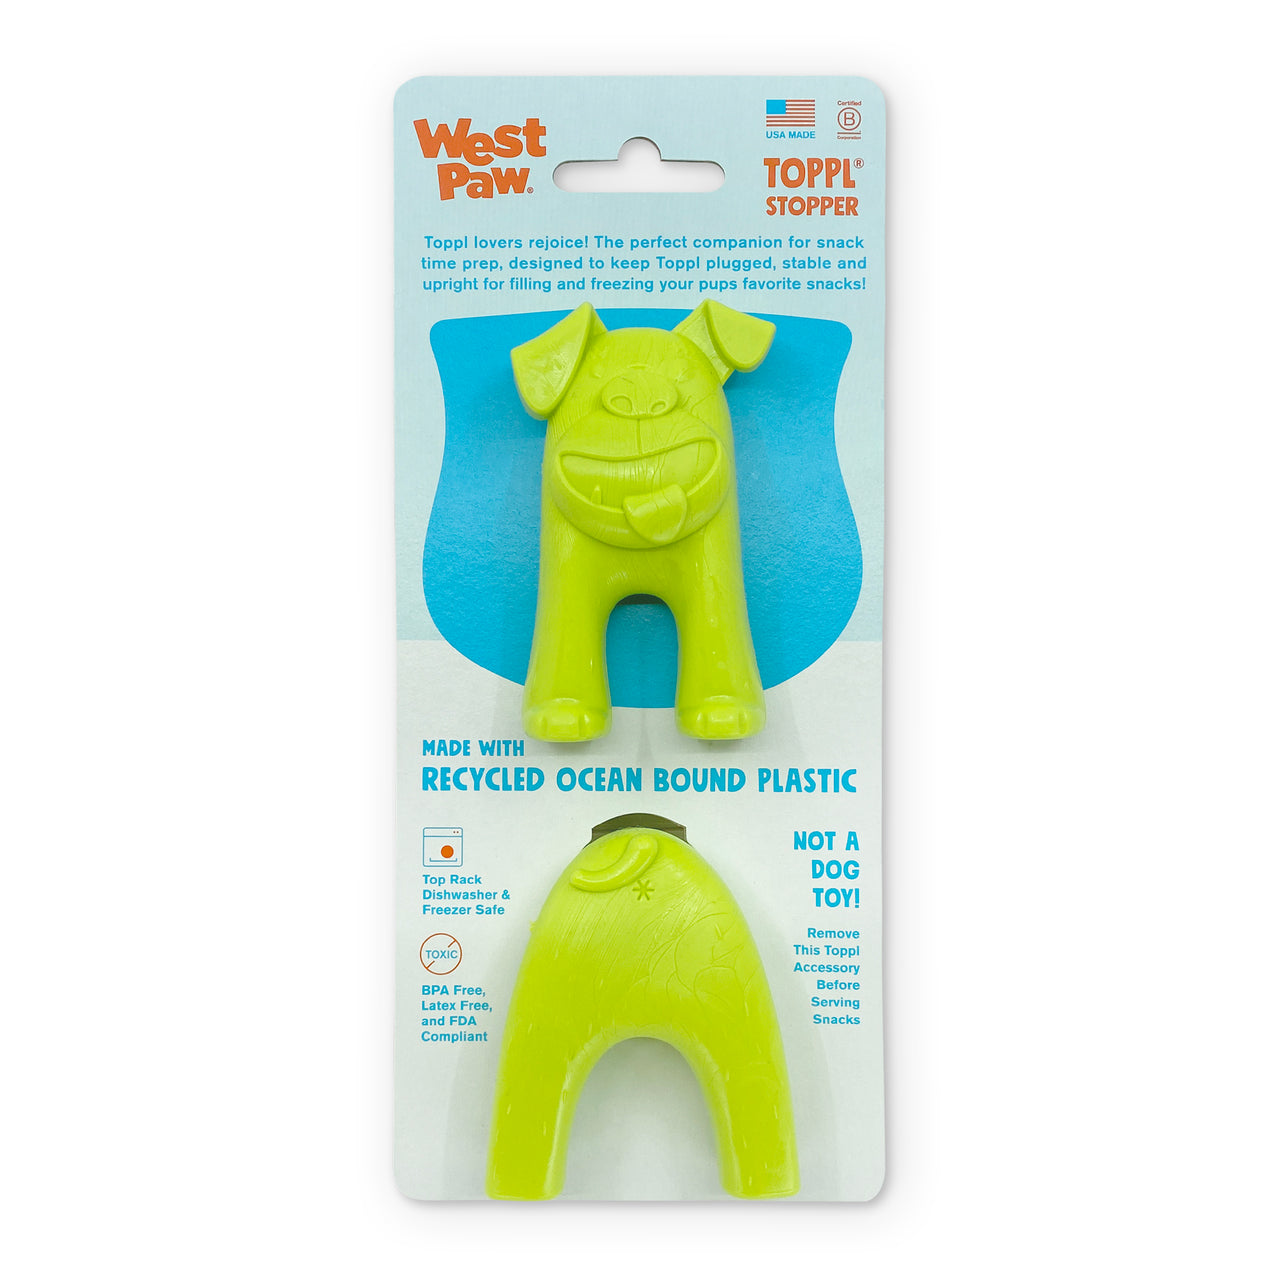 Toppl® Stopper by WestPaw | a kickstand for your Toppl toy!